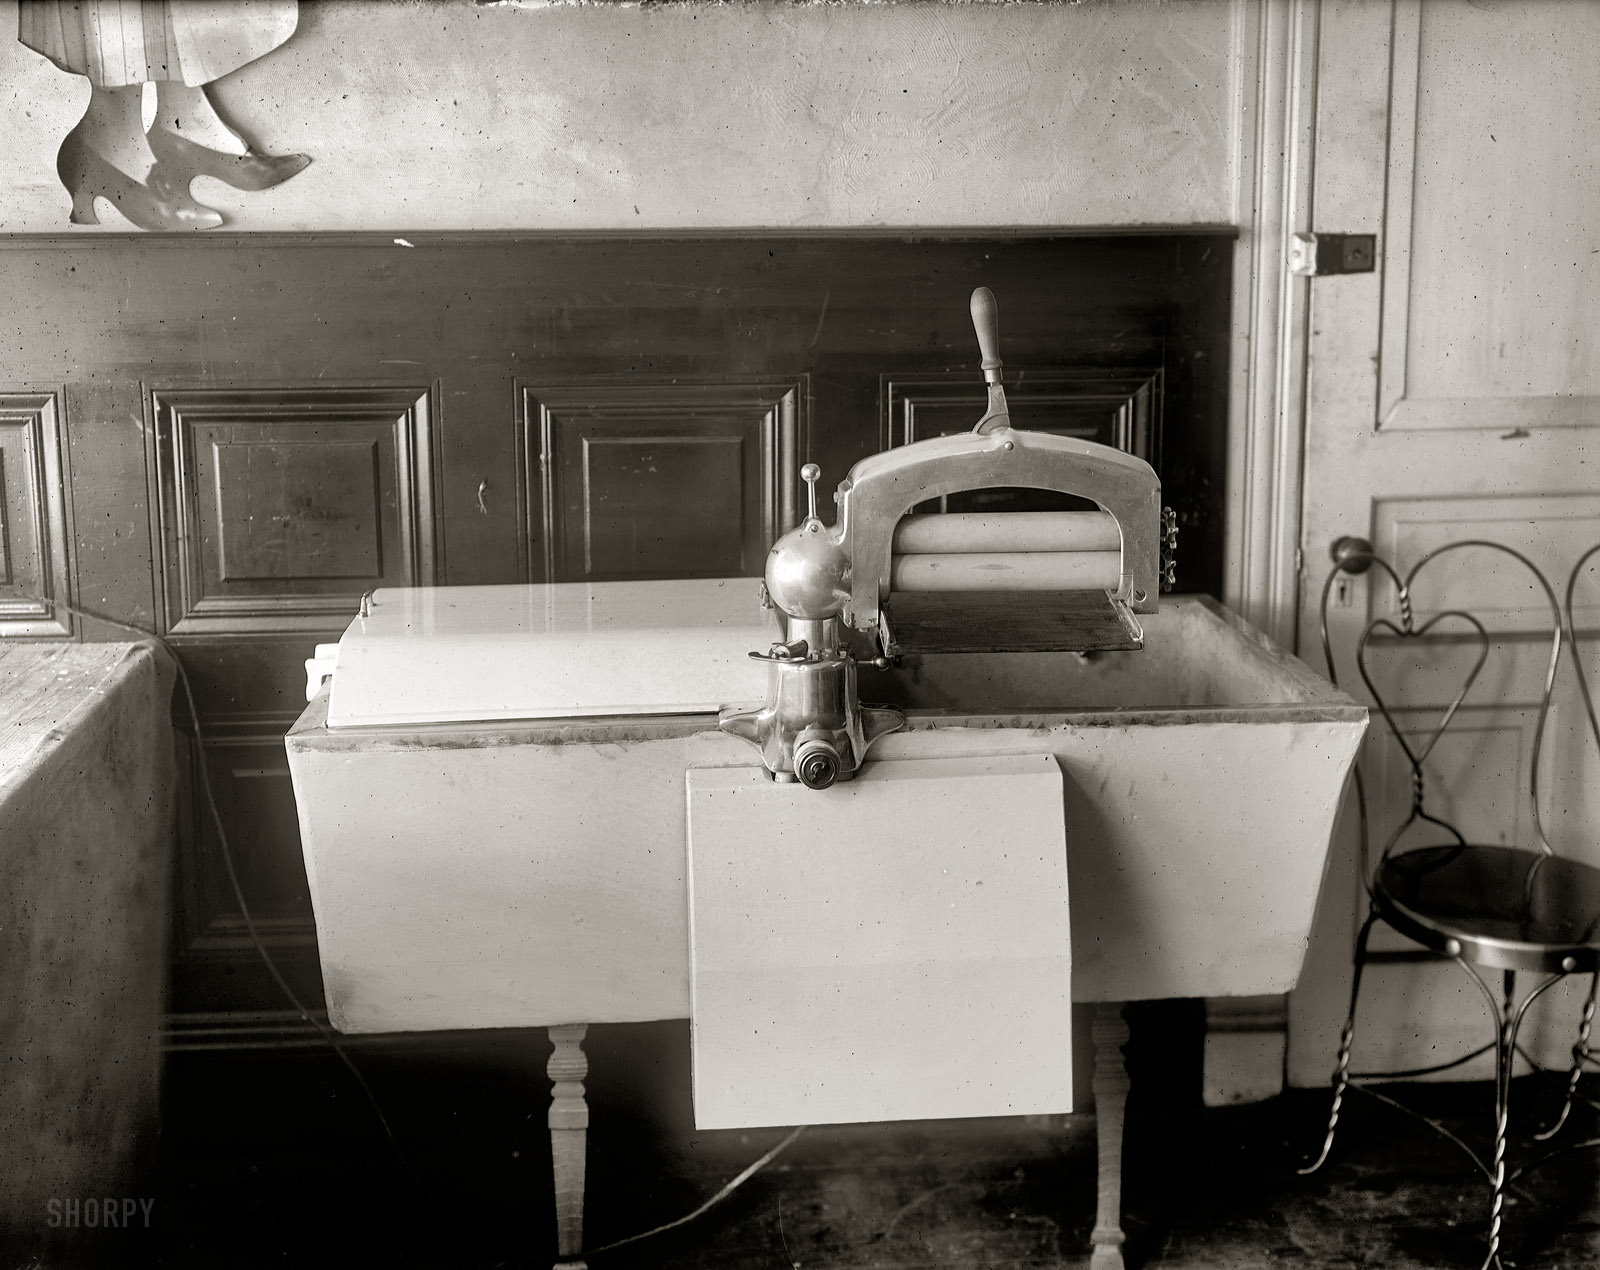 "Union Barber Supply washing machine circa 1920." All I can say here is watch your fingers. National Photo Company Collection glass negative. View full size.